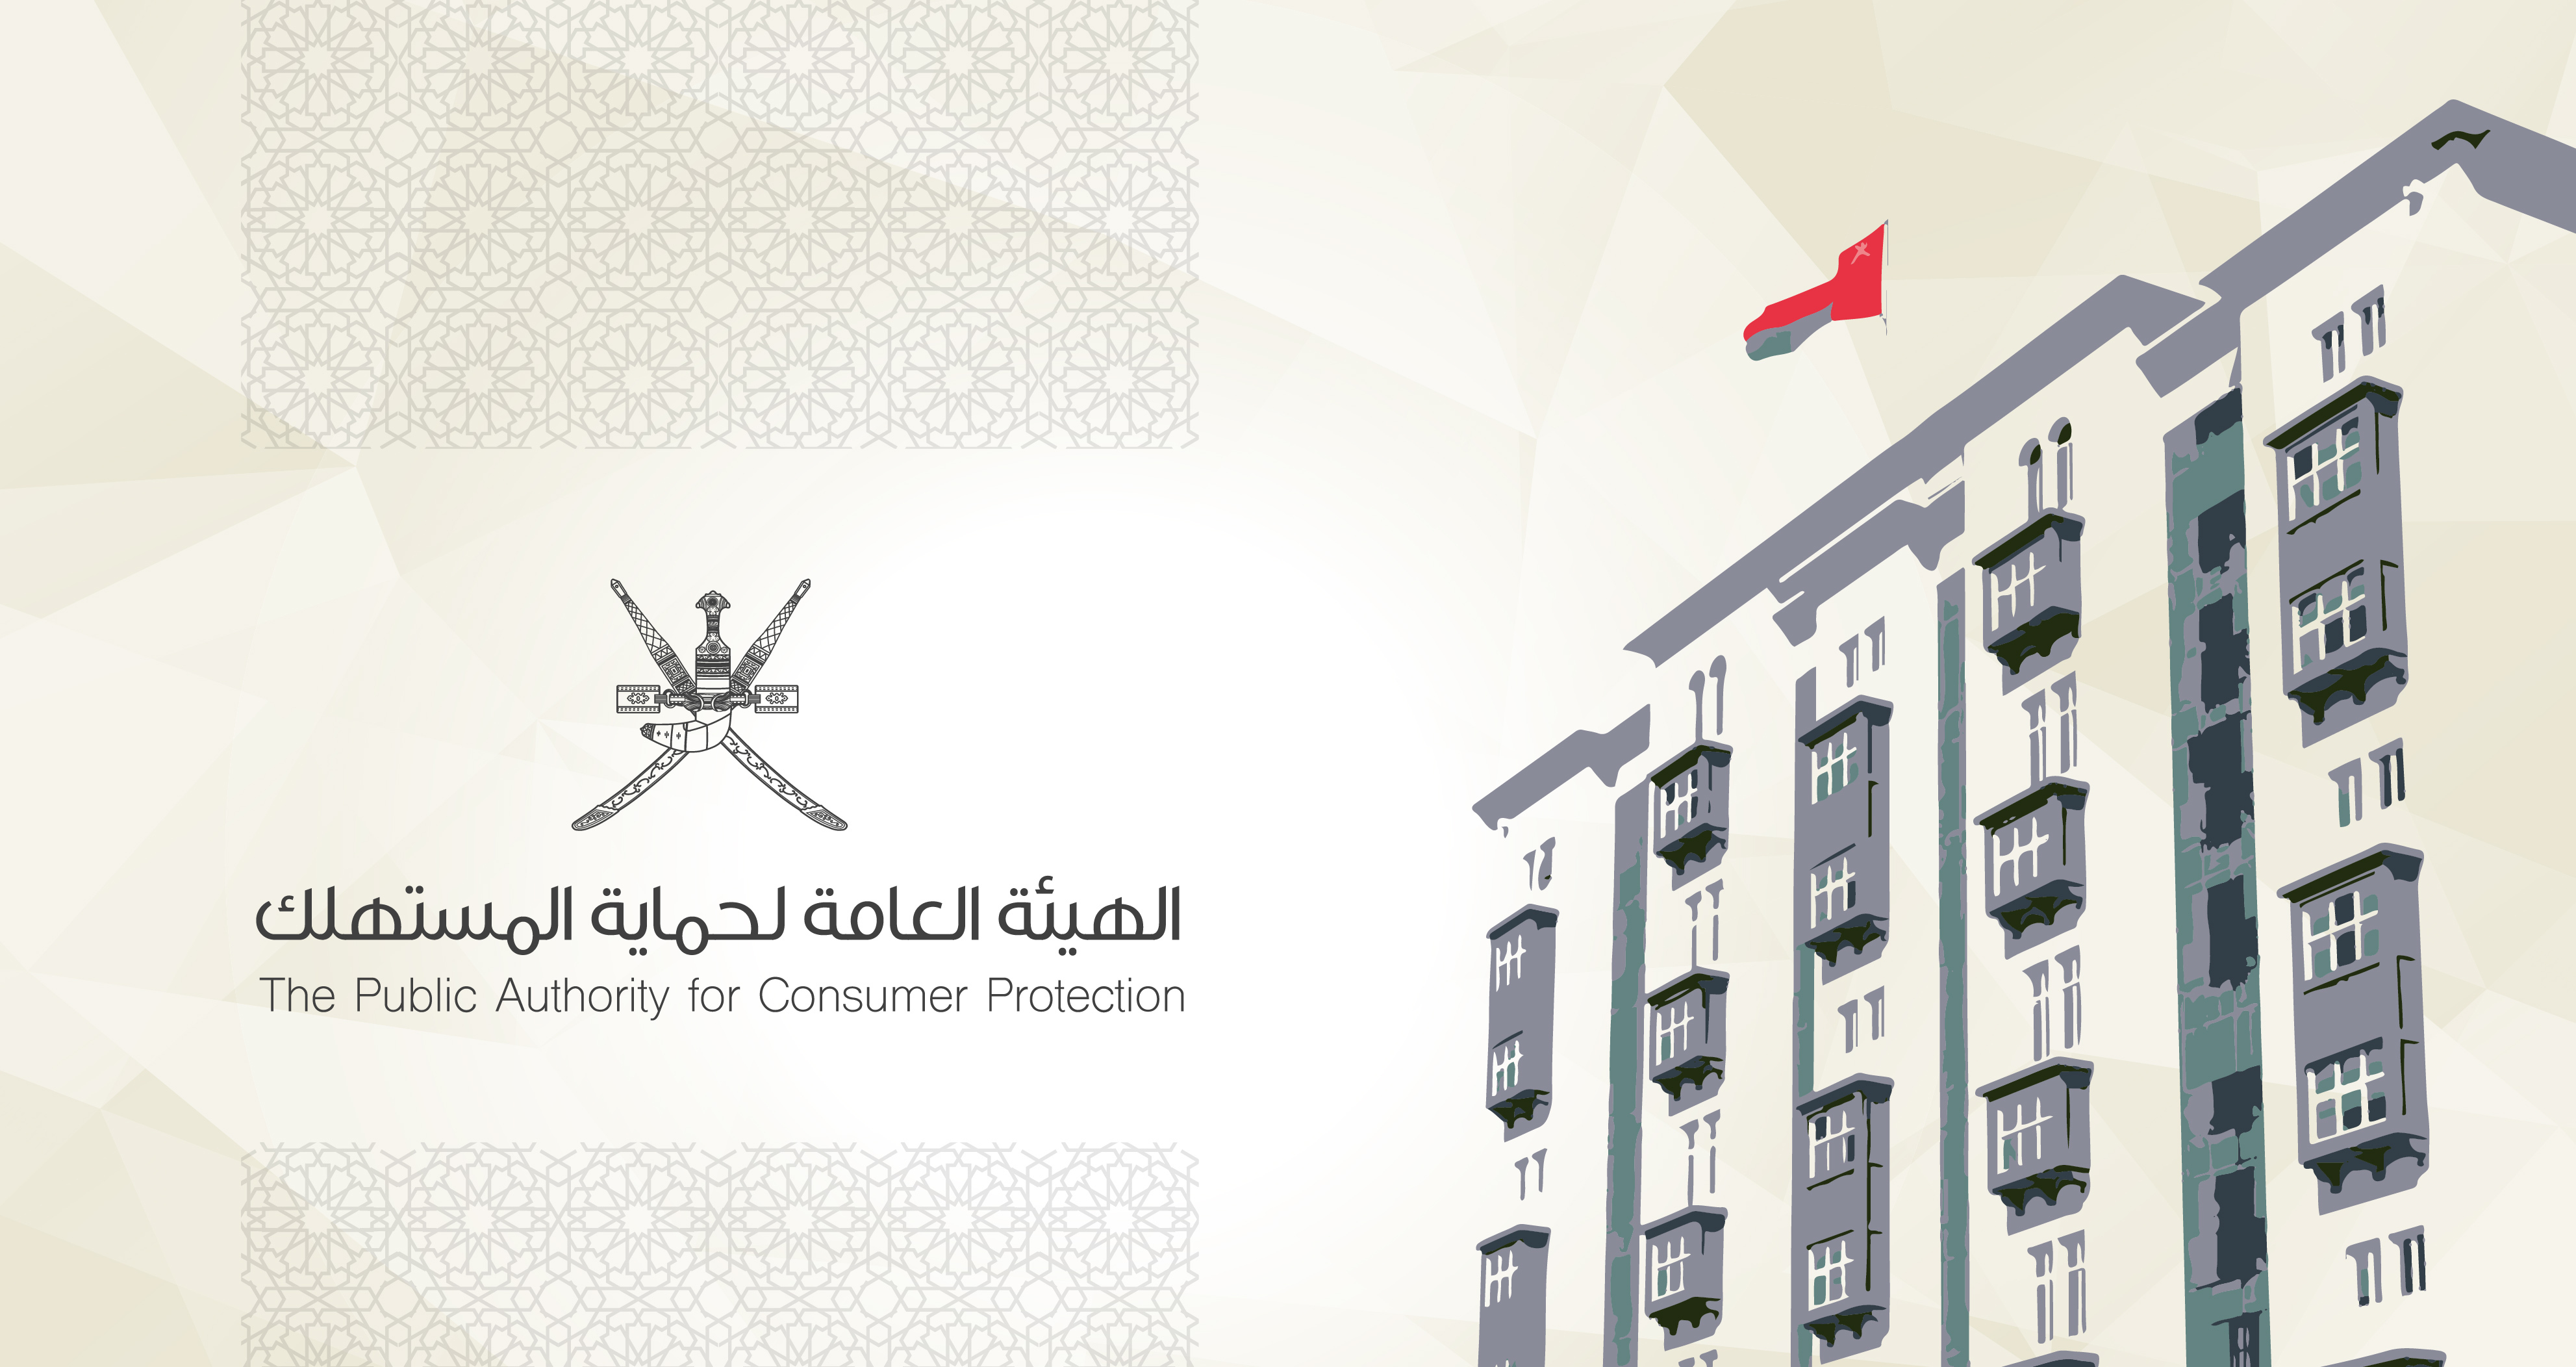 Over OMR 1,000 recovered by consumer protection authority in Oman